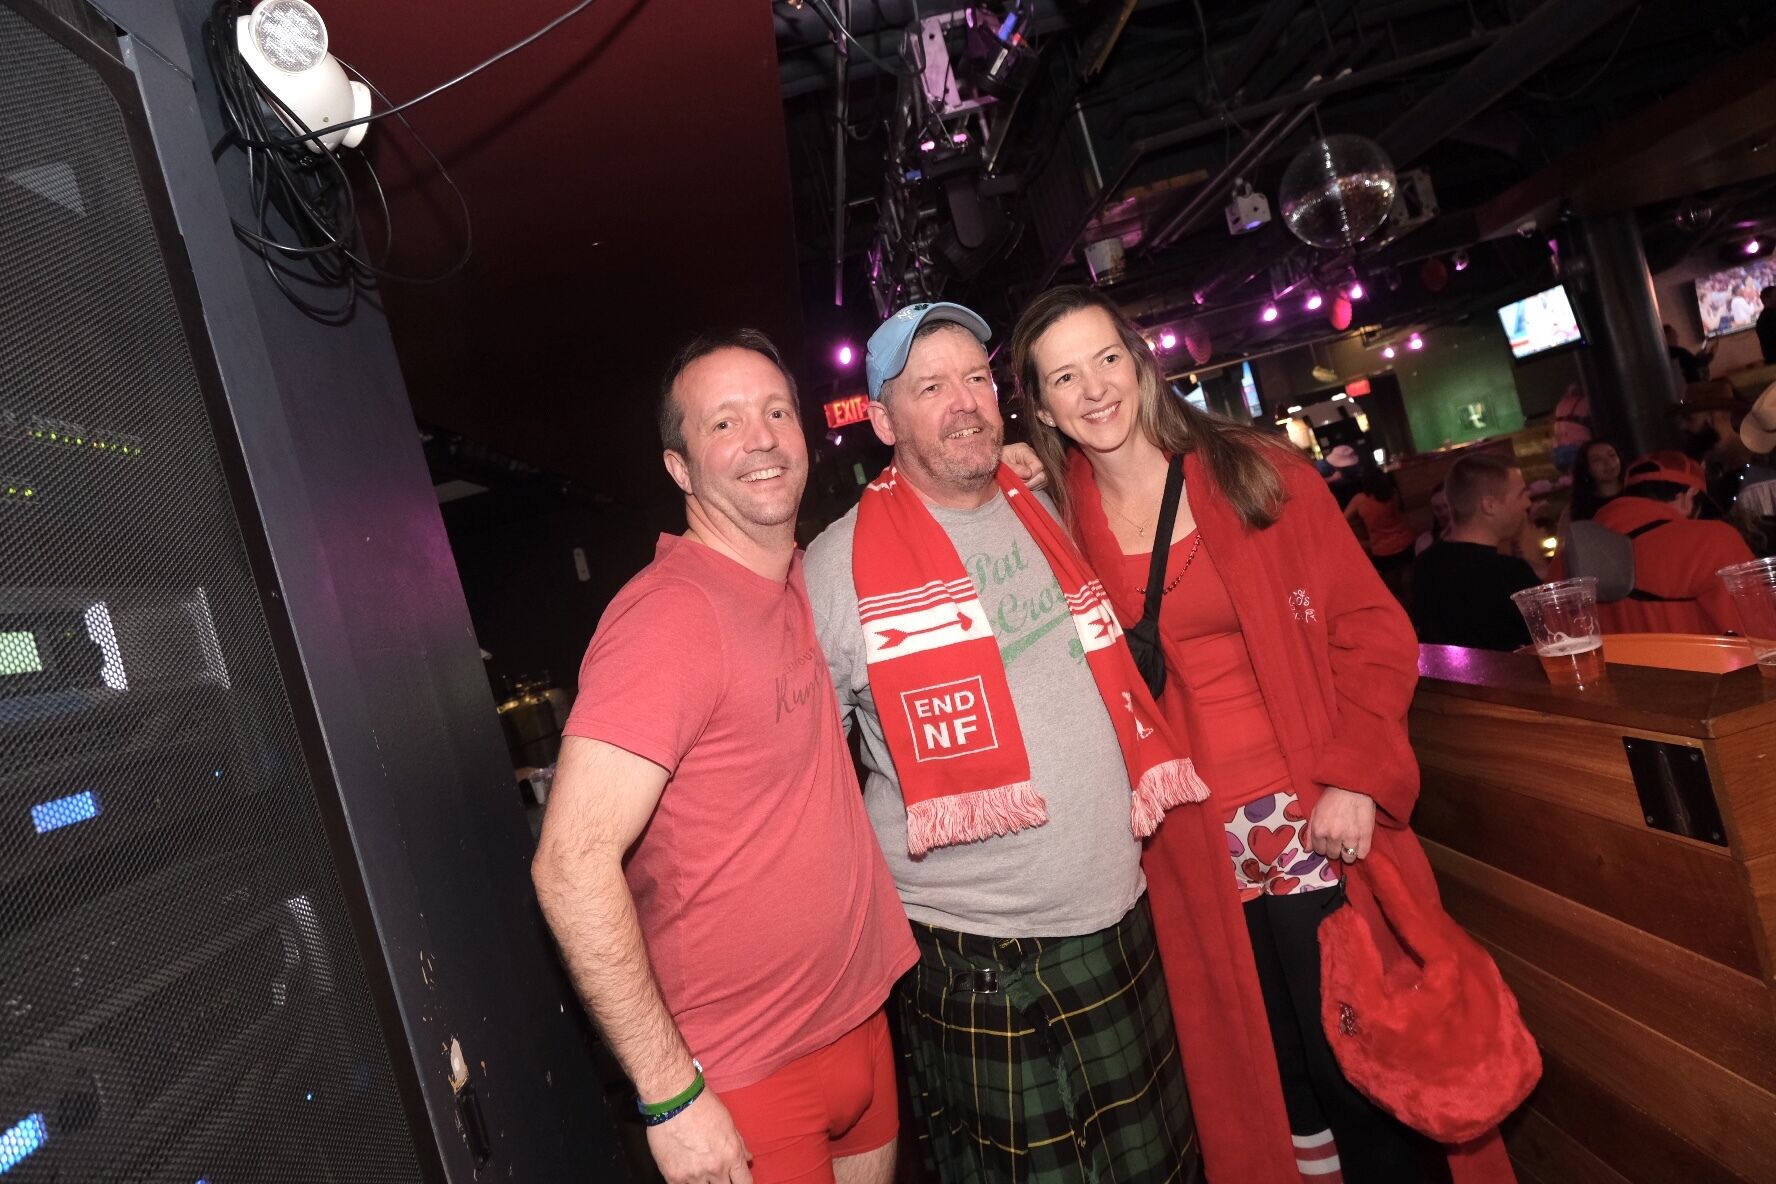 Three adults smiling at a bar event, one in a red t-shirt and shorts, another in a cap and plaid kilt, and the third in a red jacket, holding drinks.